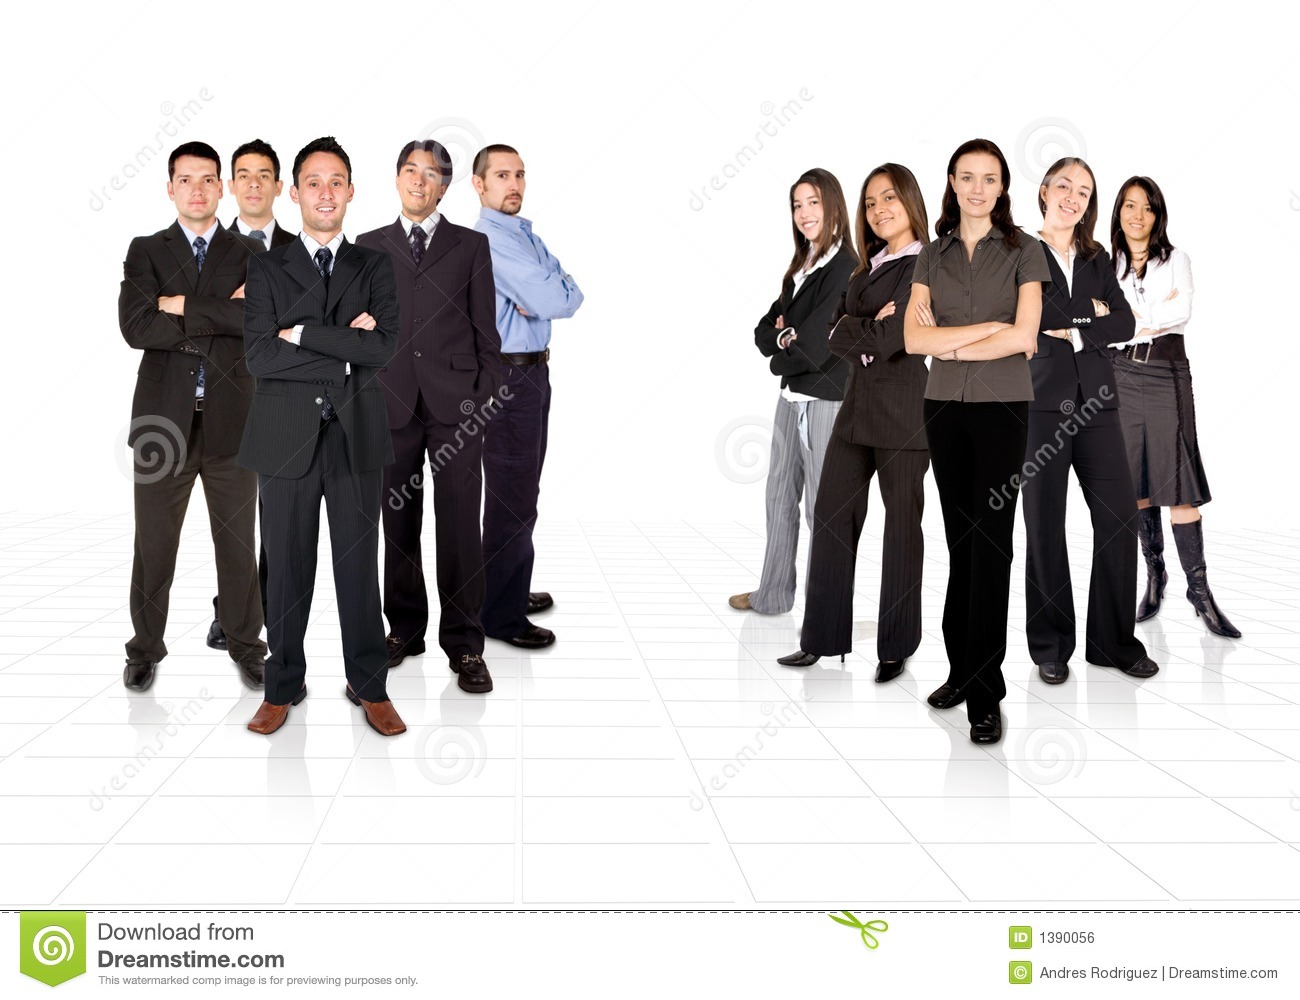 Royalty Free Stock Image  Business Teams Divided By Men And Women